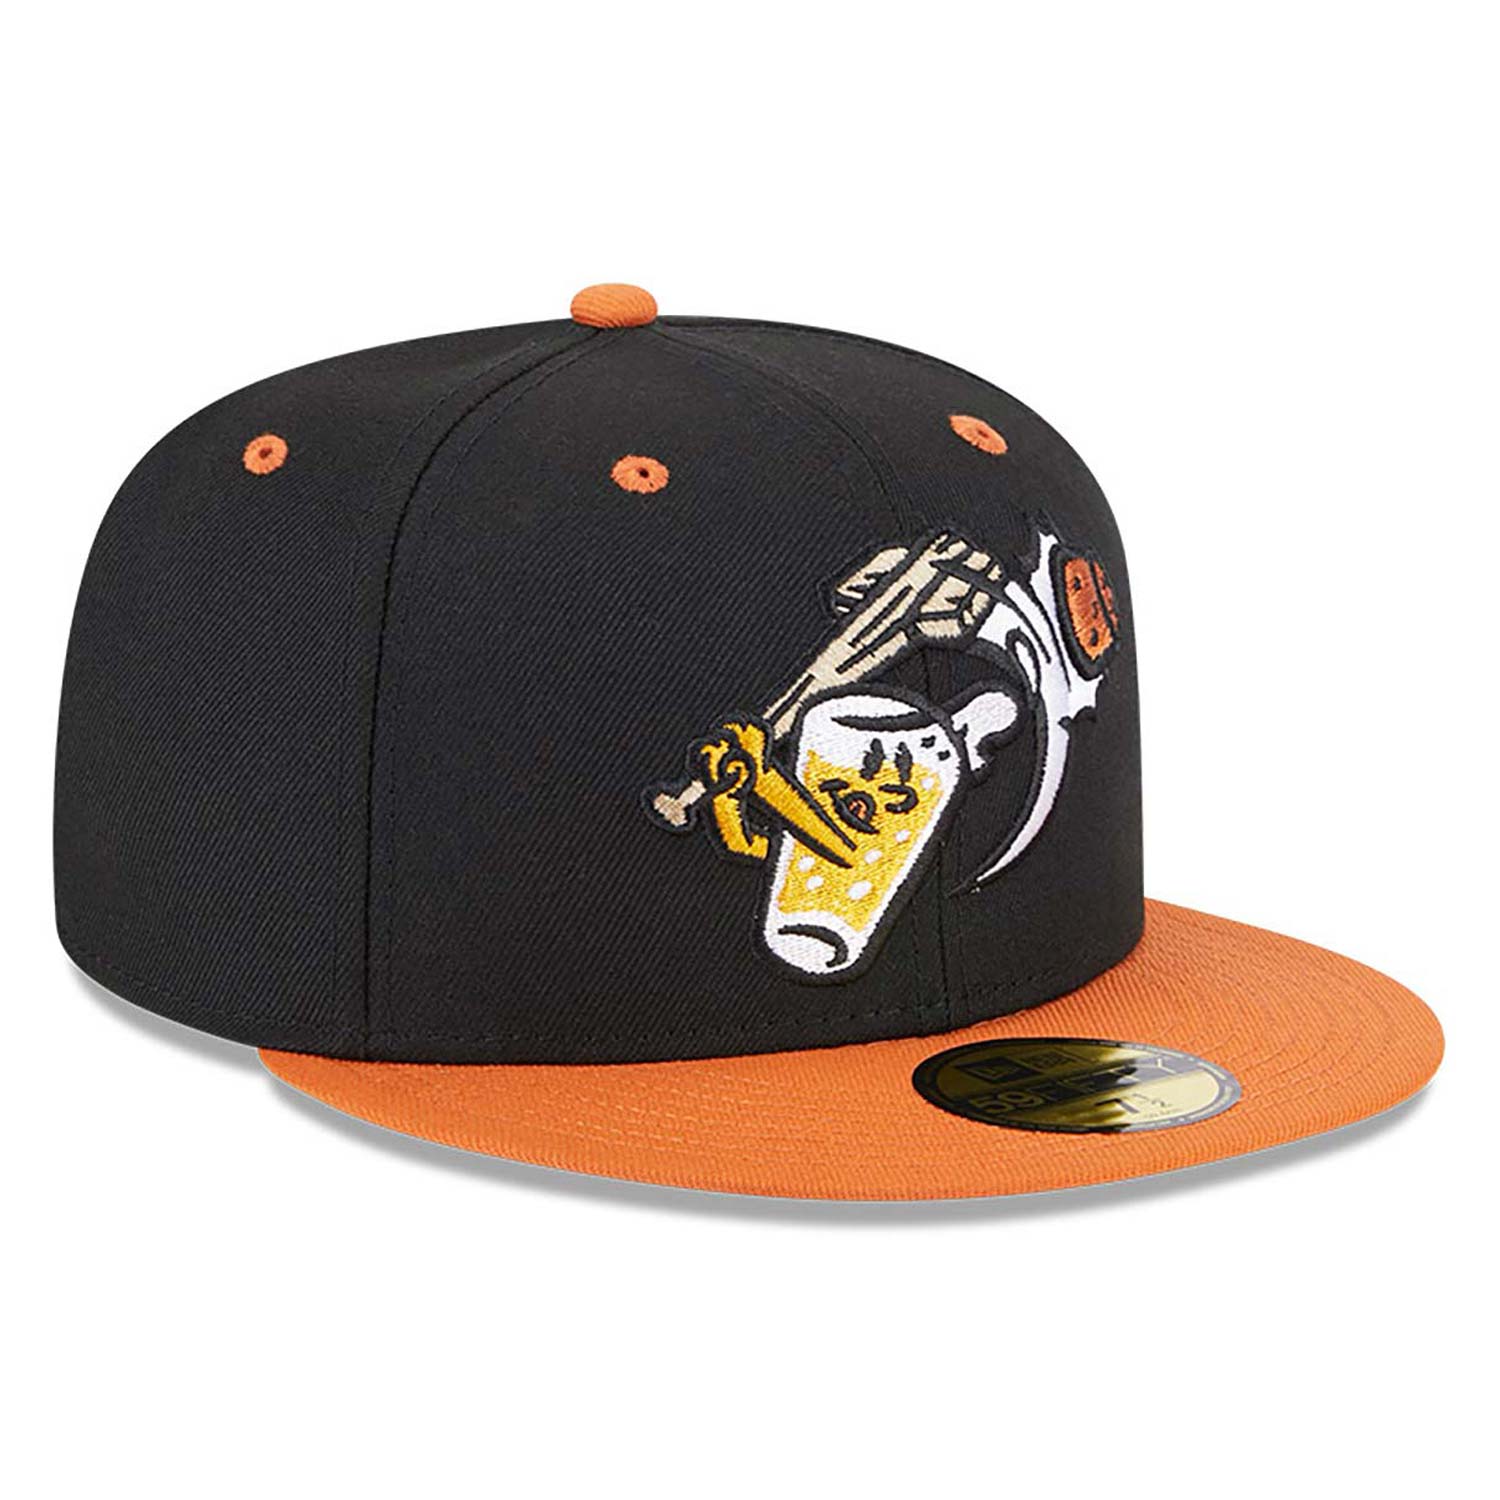 West Michigan White Caps MiLB Theme Nights Black 59FIFTY Fitted Cap